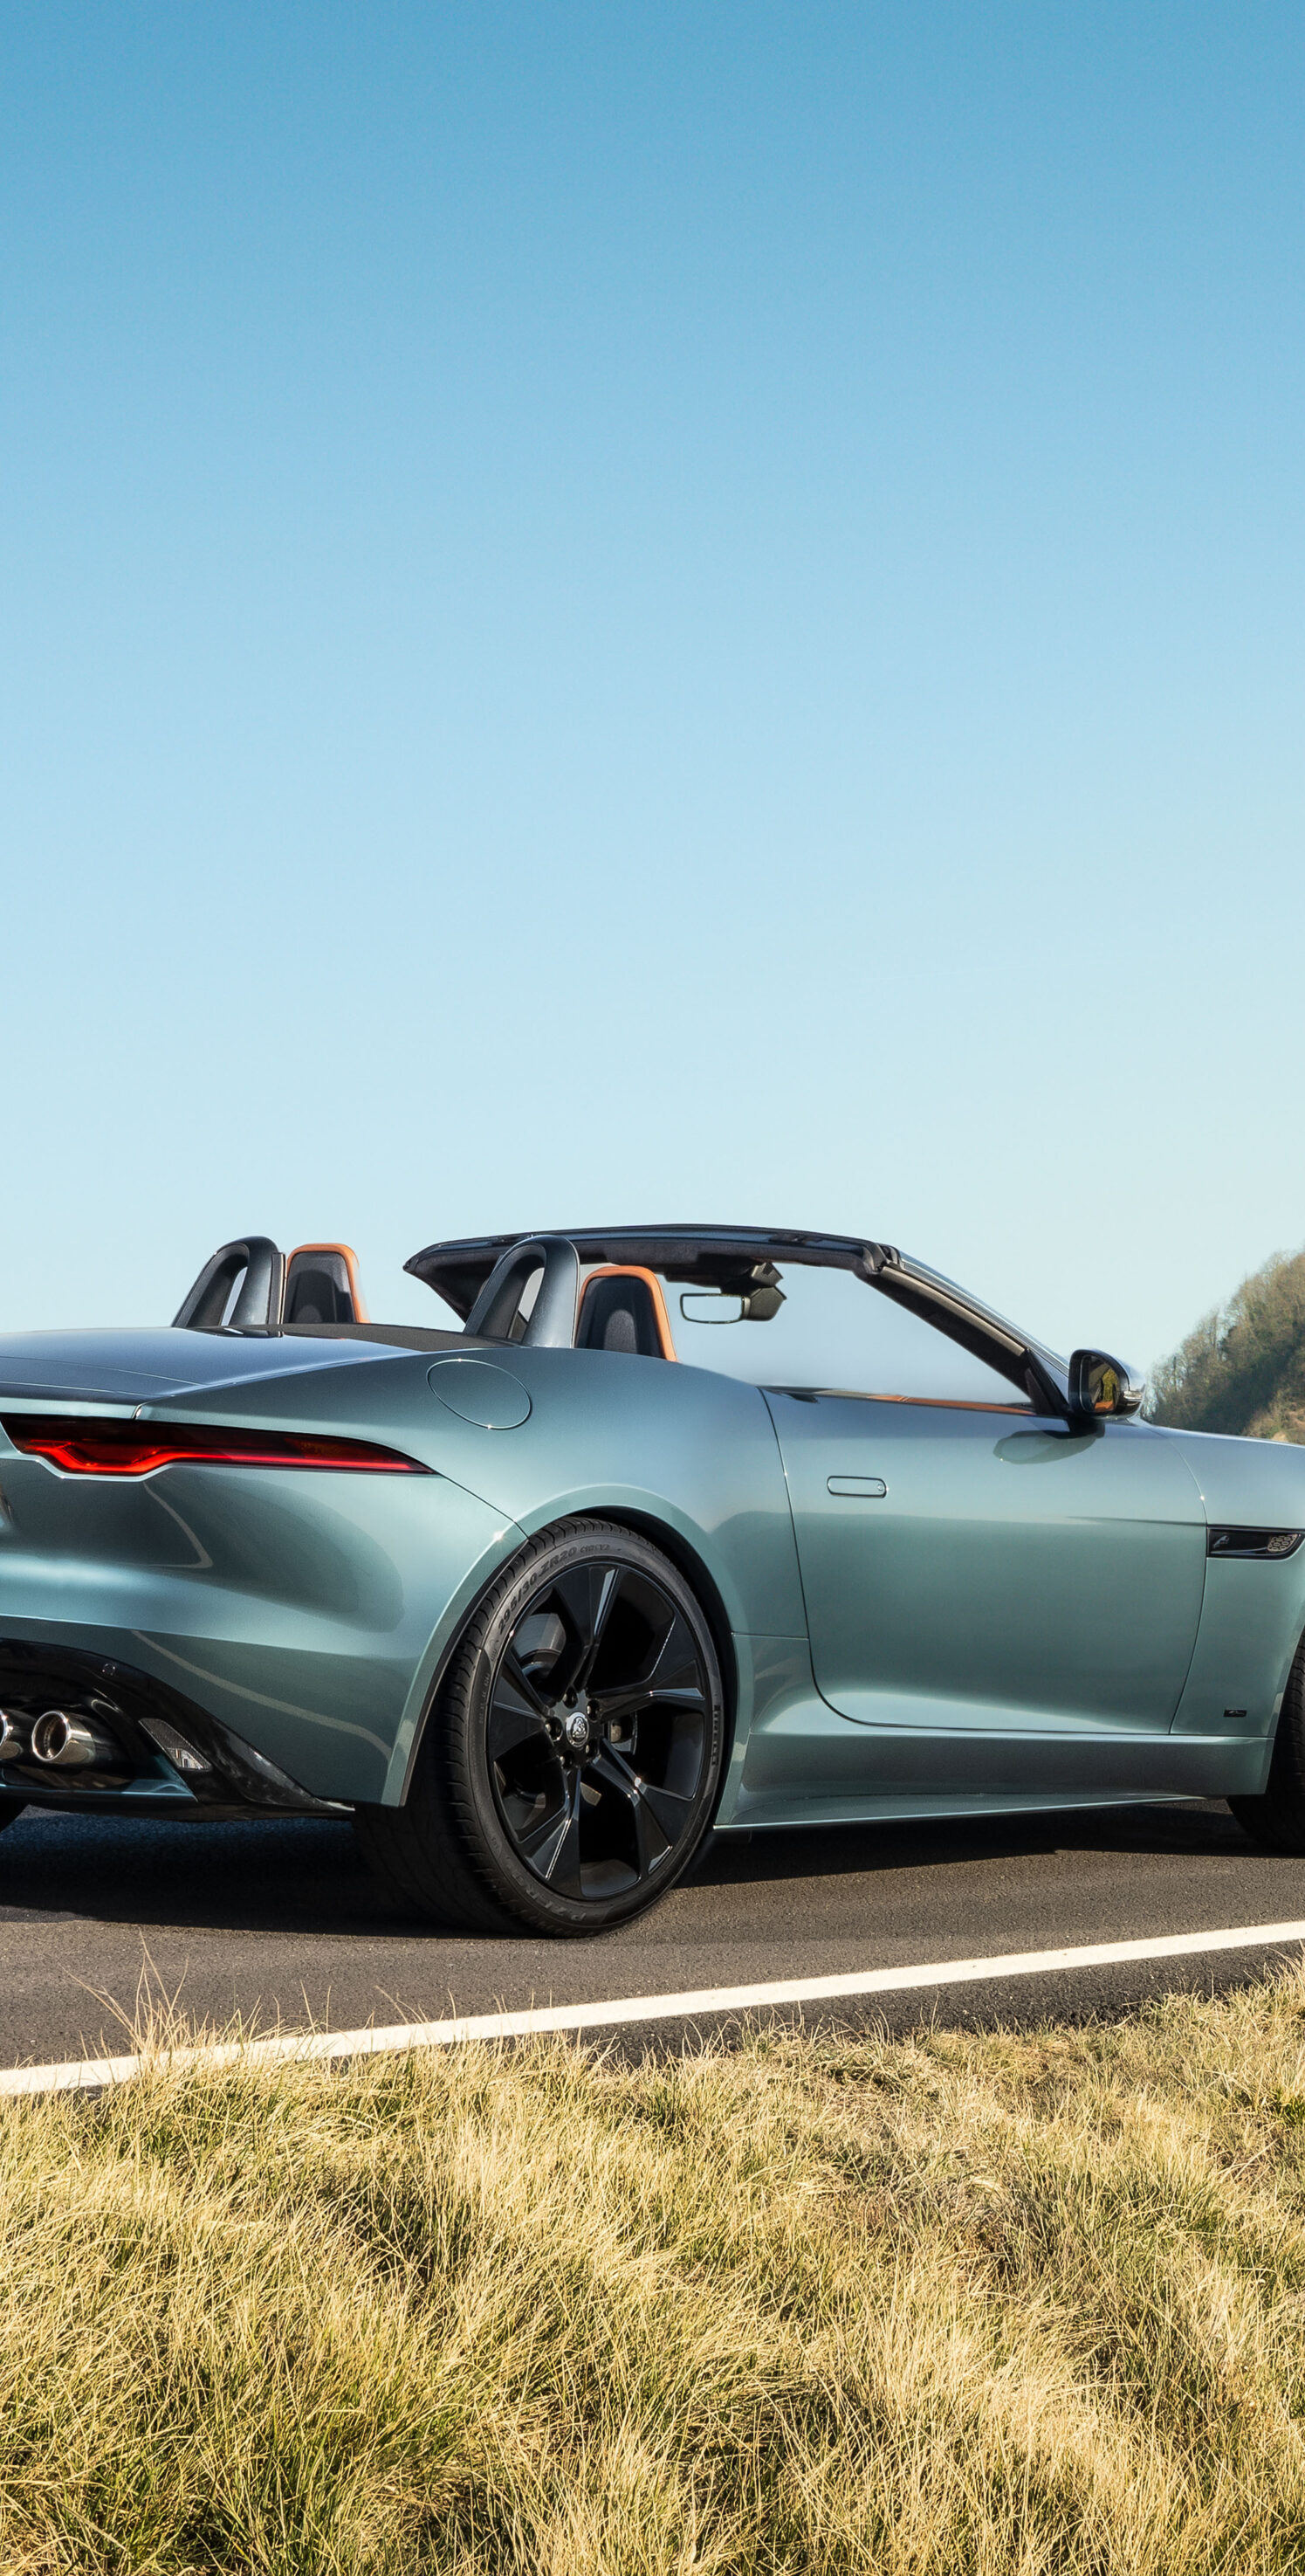 https://autofilter.sk/assets/images/f-type/gallery/Jag_F-TYPE_24MY_Conv_01_Exterior_Static_Rear3Qr_March_2023_DSC07440.jpg - obrazok